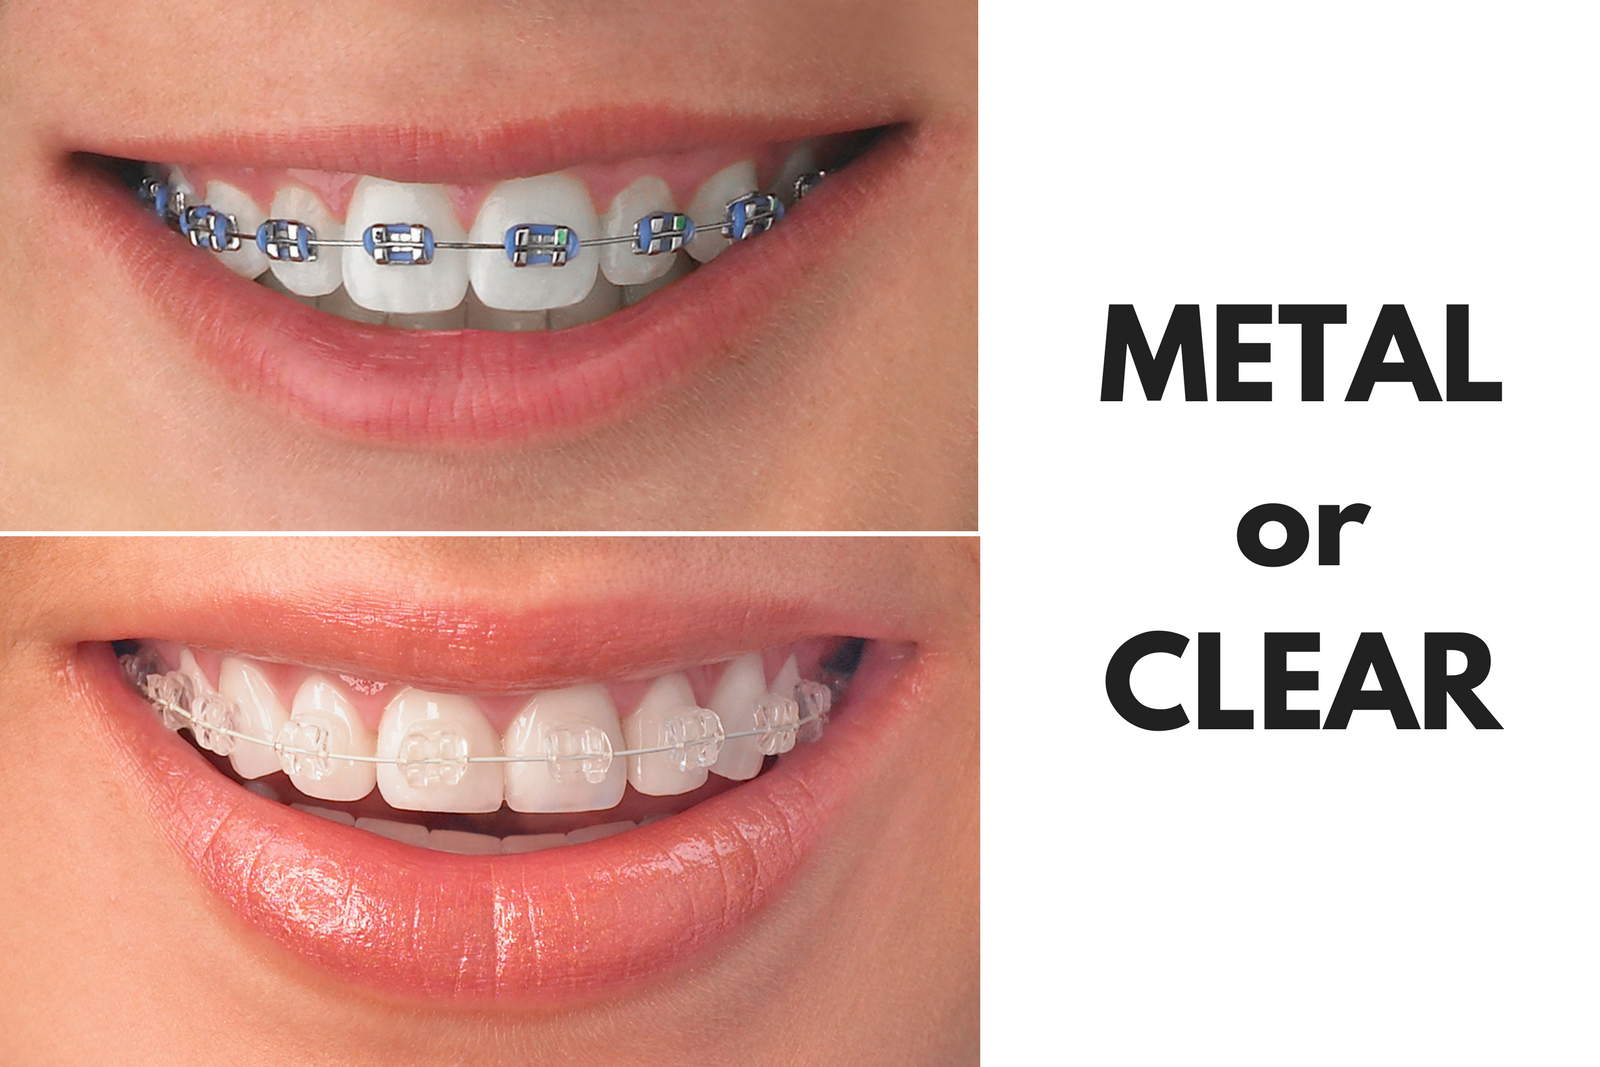 Ask Your Memphis Dentist: Should I Get Metal or Clear Braces?